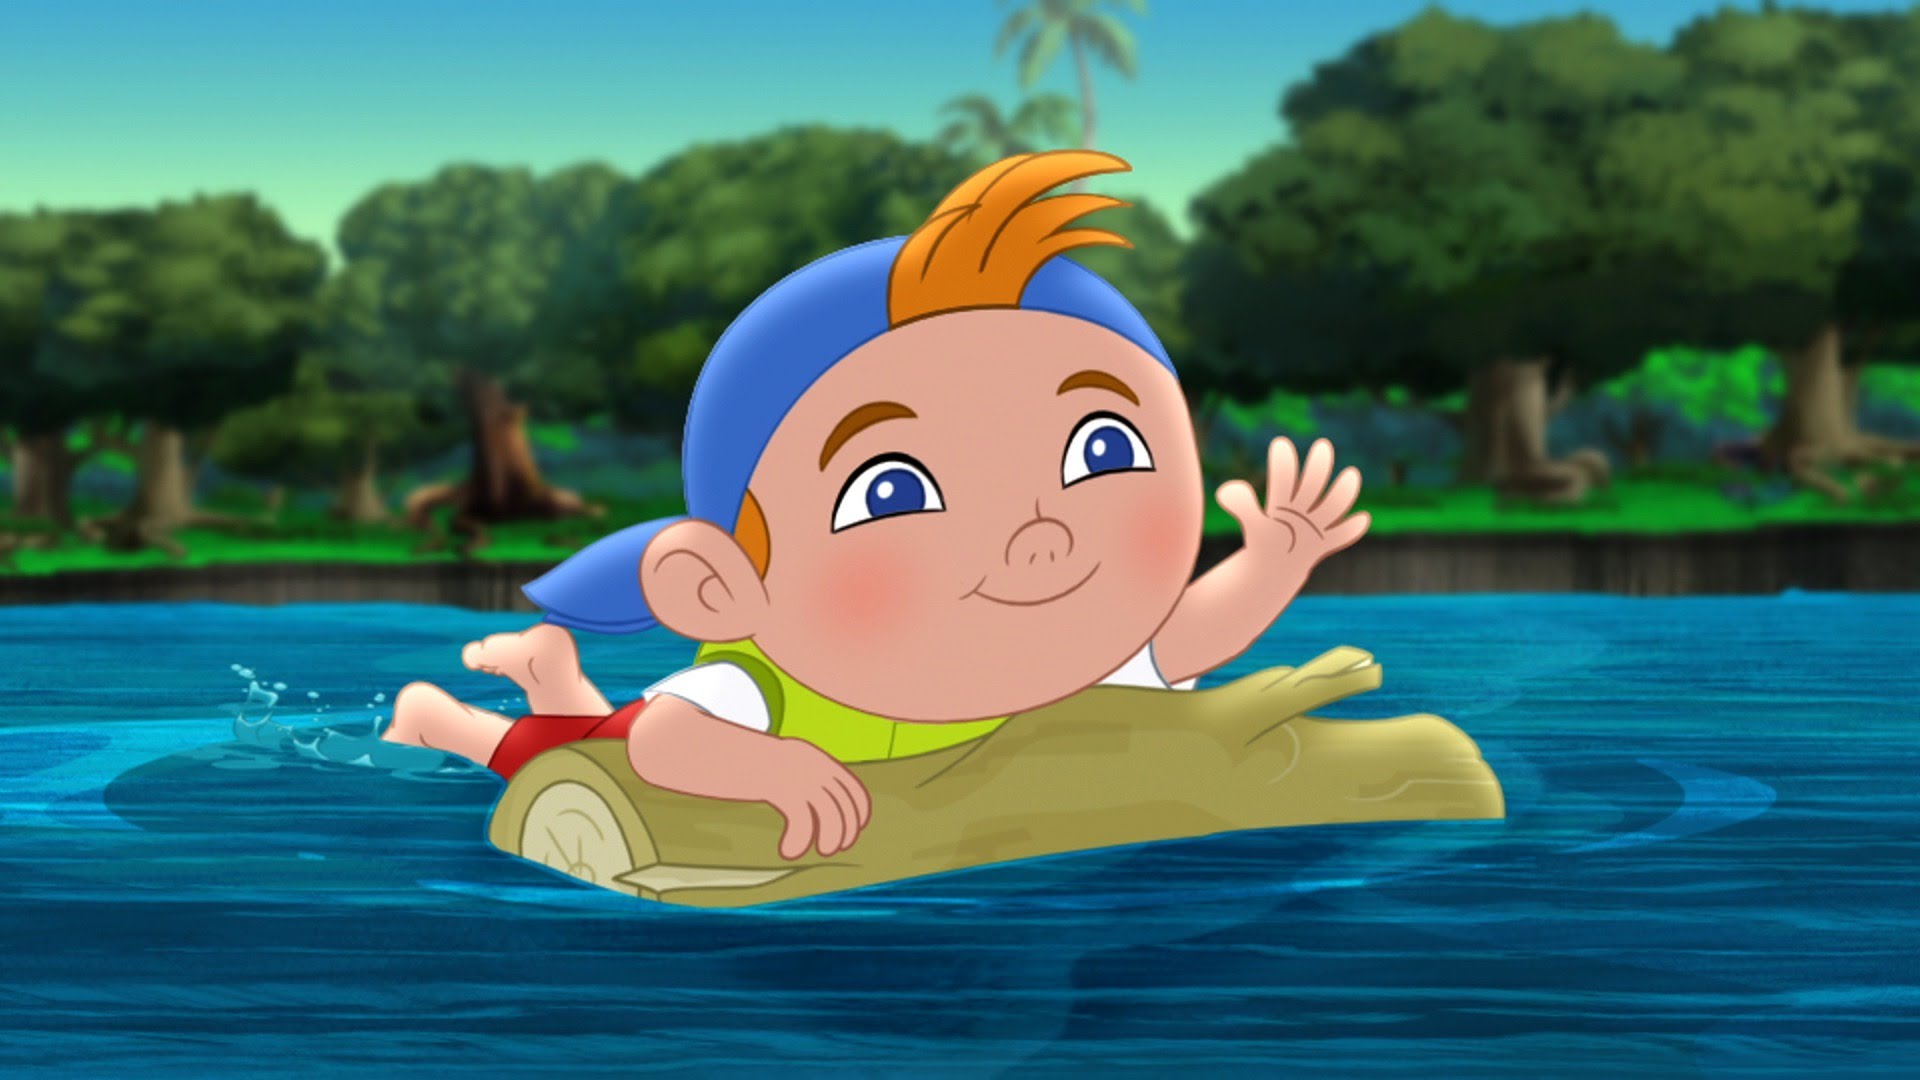 Image Cubby Surfin Turf Jake And The Never Land Pirates Wiki